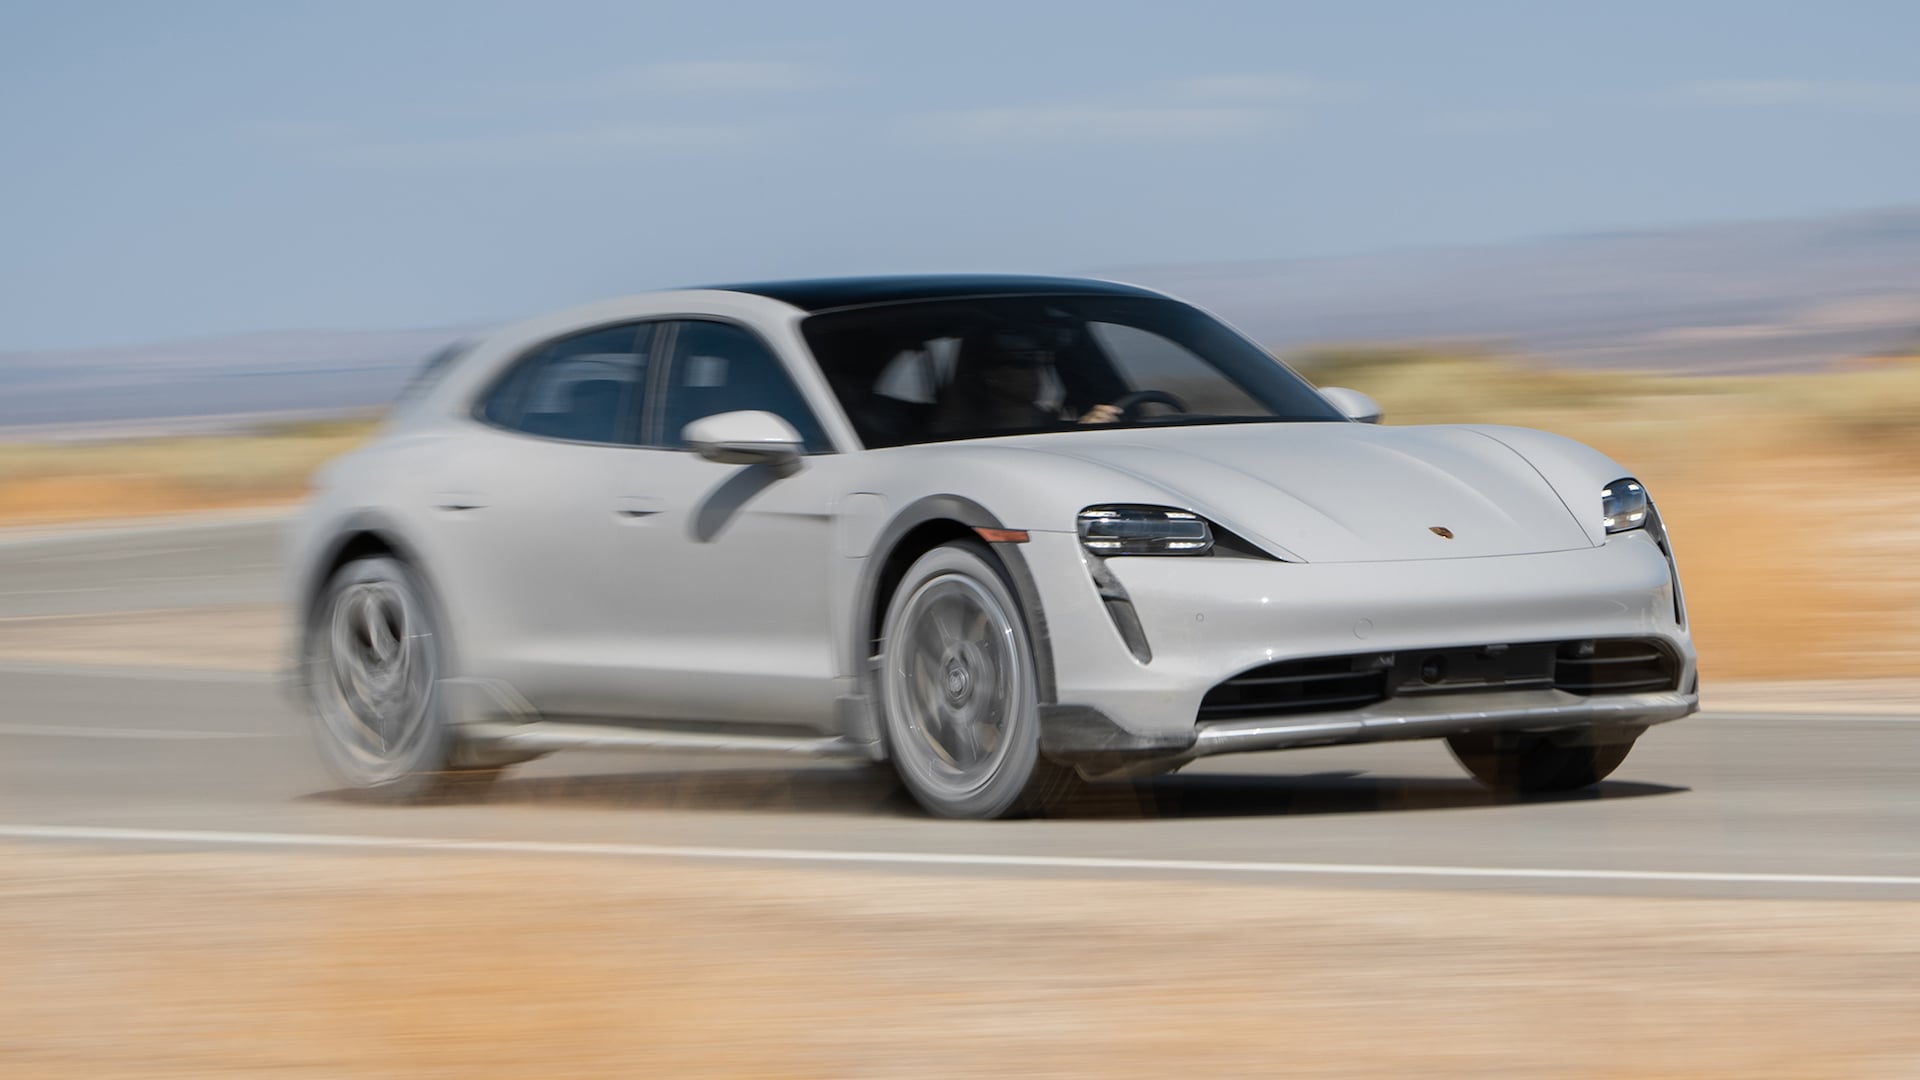 2022 Porsche Taycan 4 Cross Turismo Pros and Cons Review: Wag Swag?